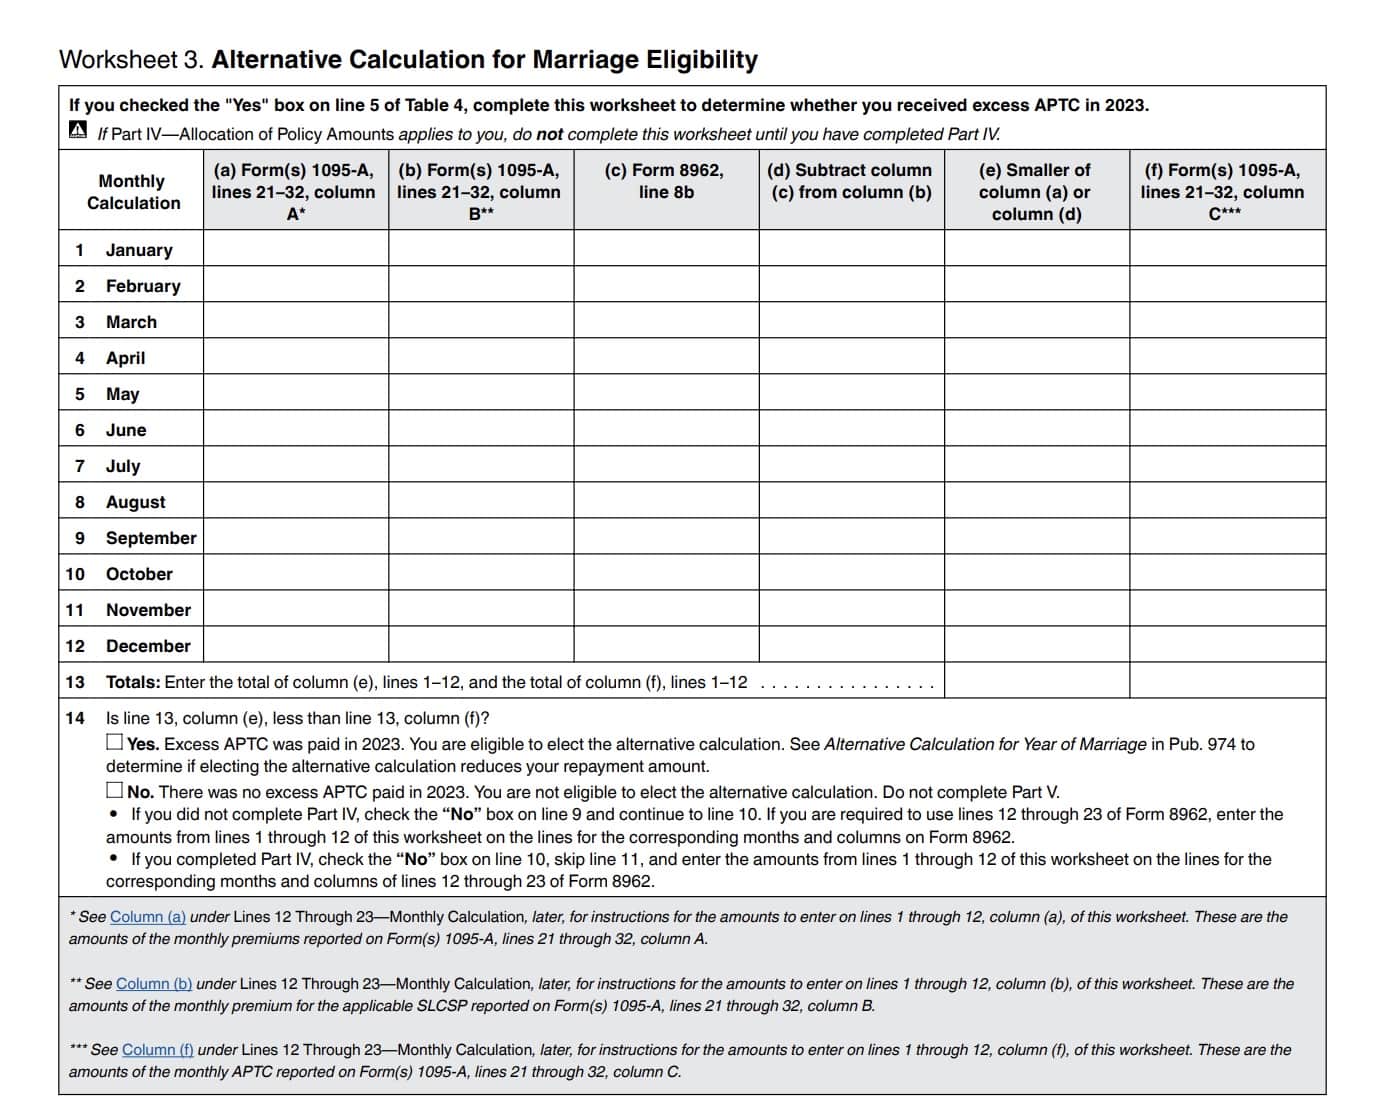 Worksheet 3: alternative calculation for marriage eligibility